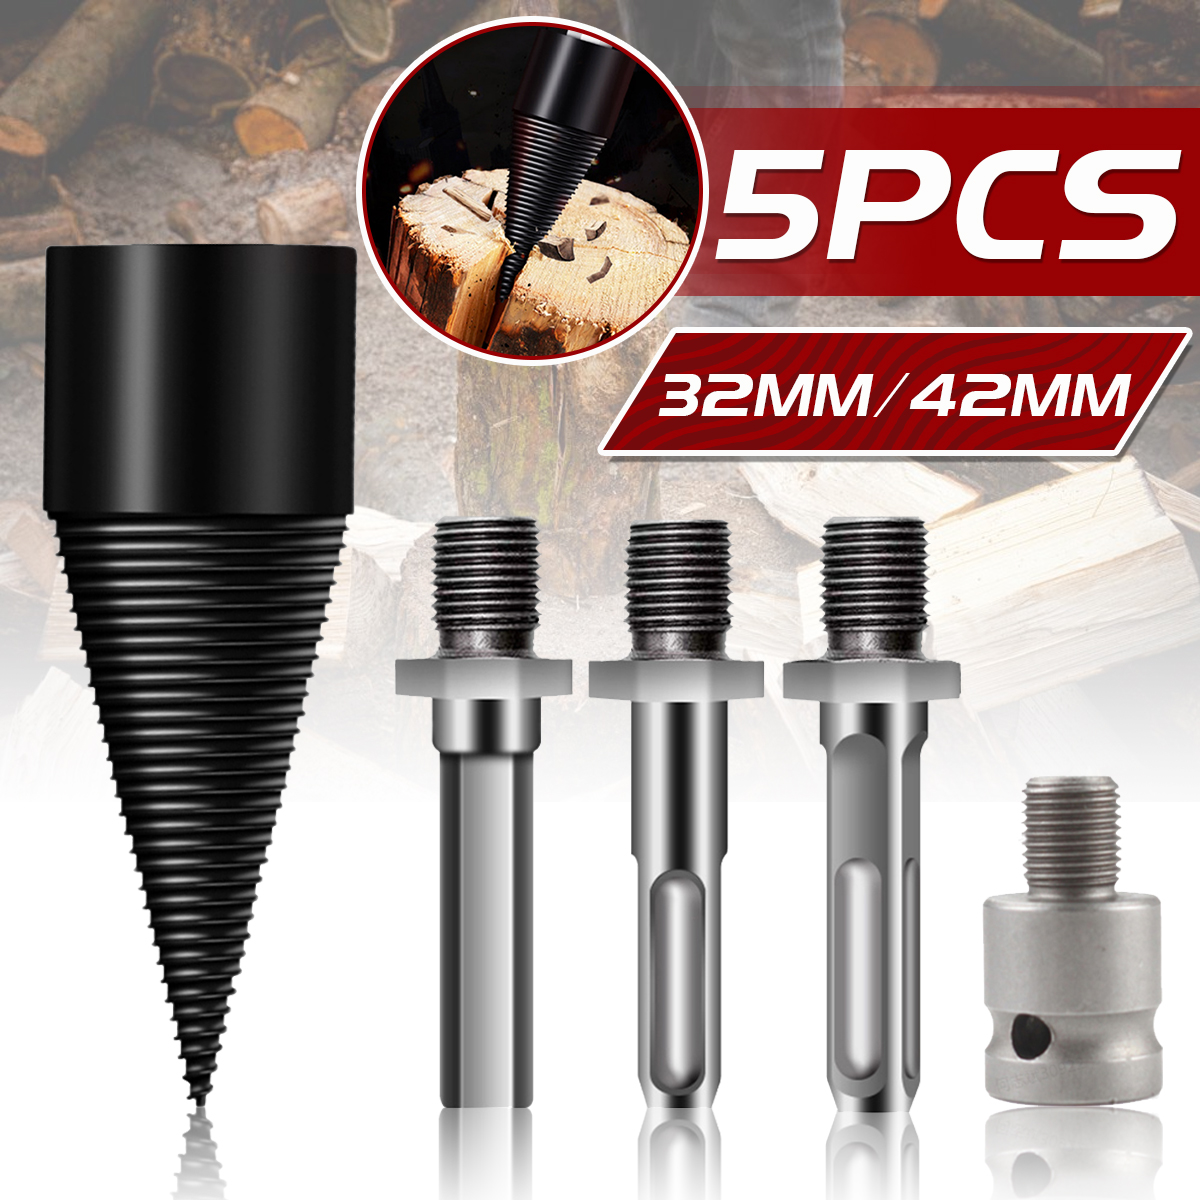 5-PCS-42mm32mm-Firewood-Splitter-Drill-RoundHexTriangleWrench-Shank-Wood-Cone-Reamer-Punch-Driver-St-1962068-1